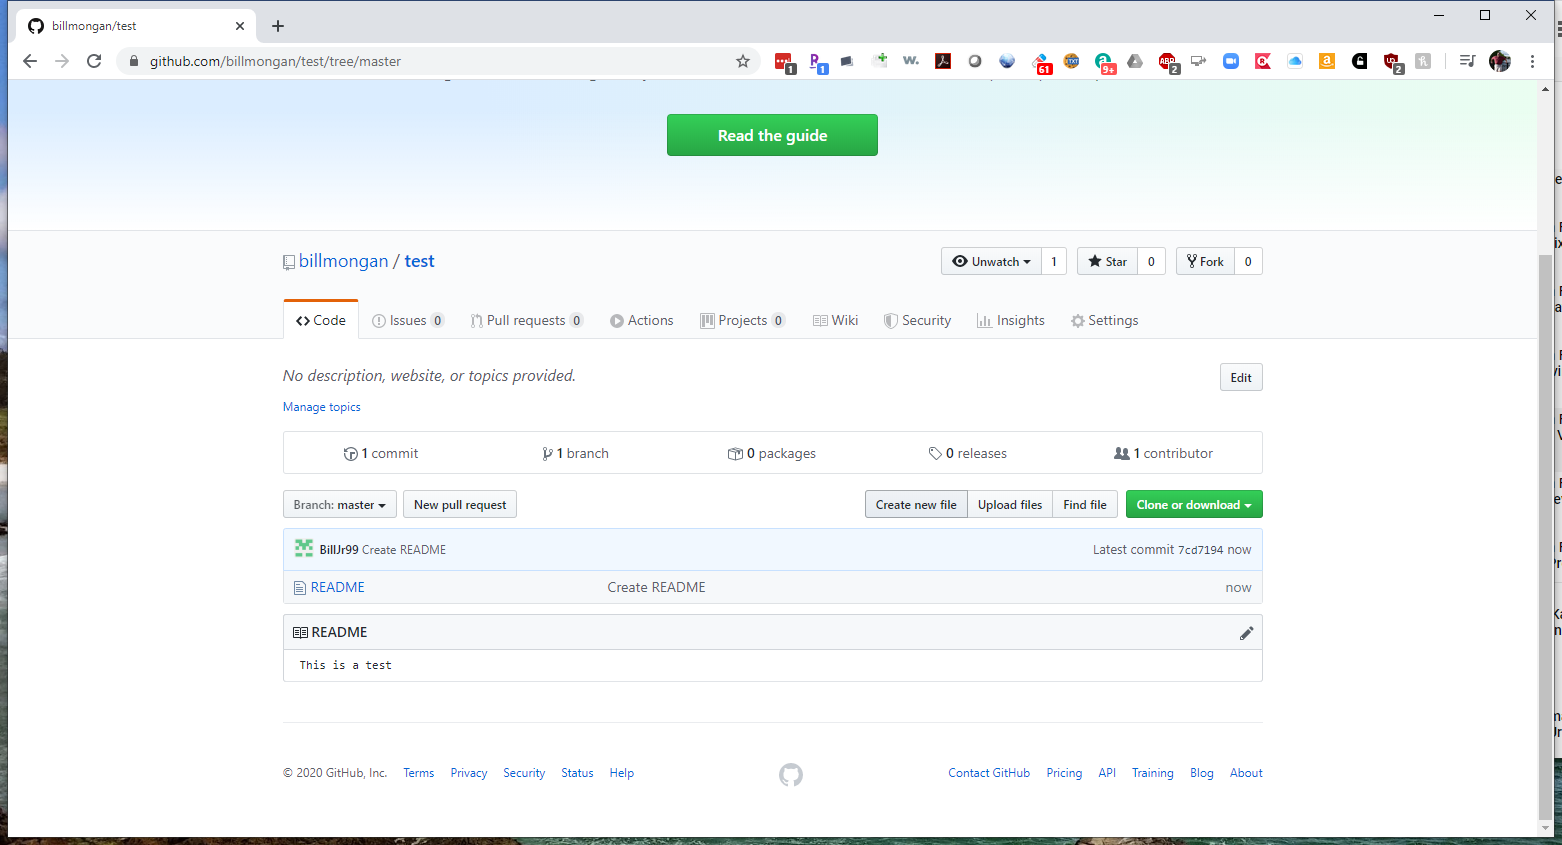 Create a File on a GitHub Repository through the Web Interface